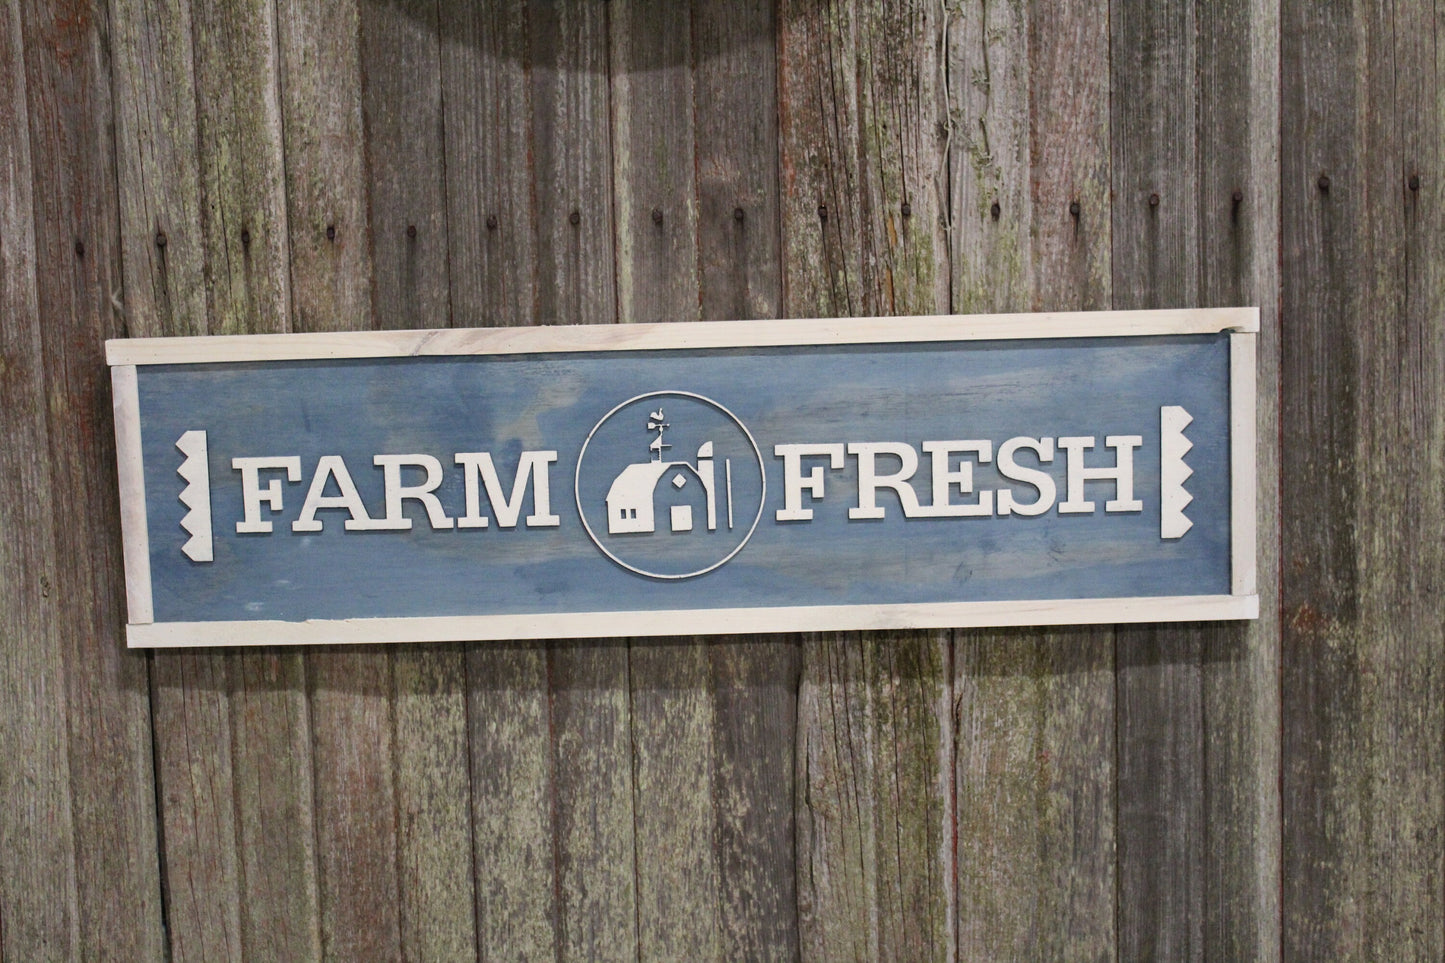 Farm Fresh Wood Sign Raised Text Barn Market Adverting Organic Small Shop Sign 3D White Washed Rustic Primitive Wall Décor Wall Art